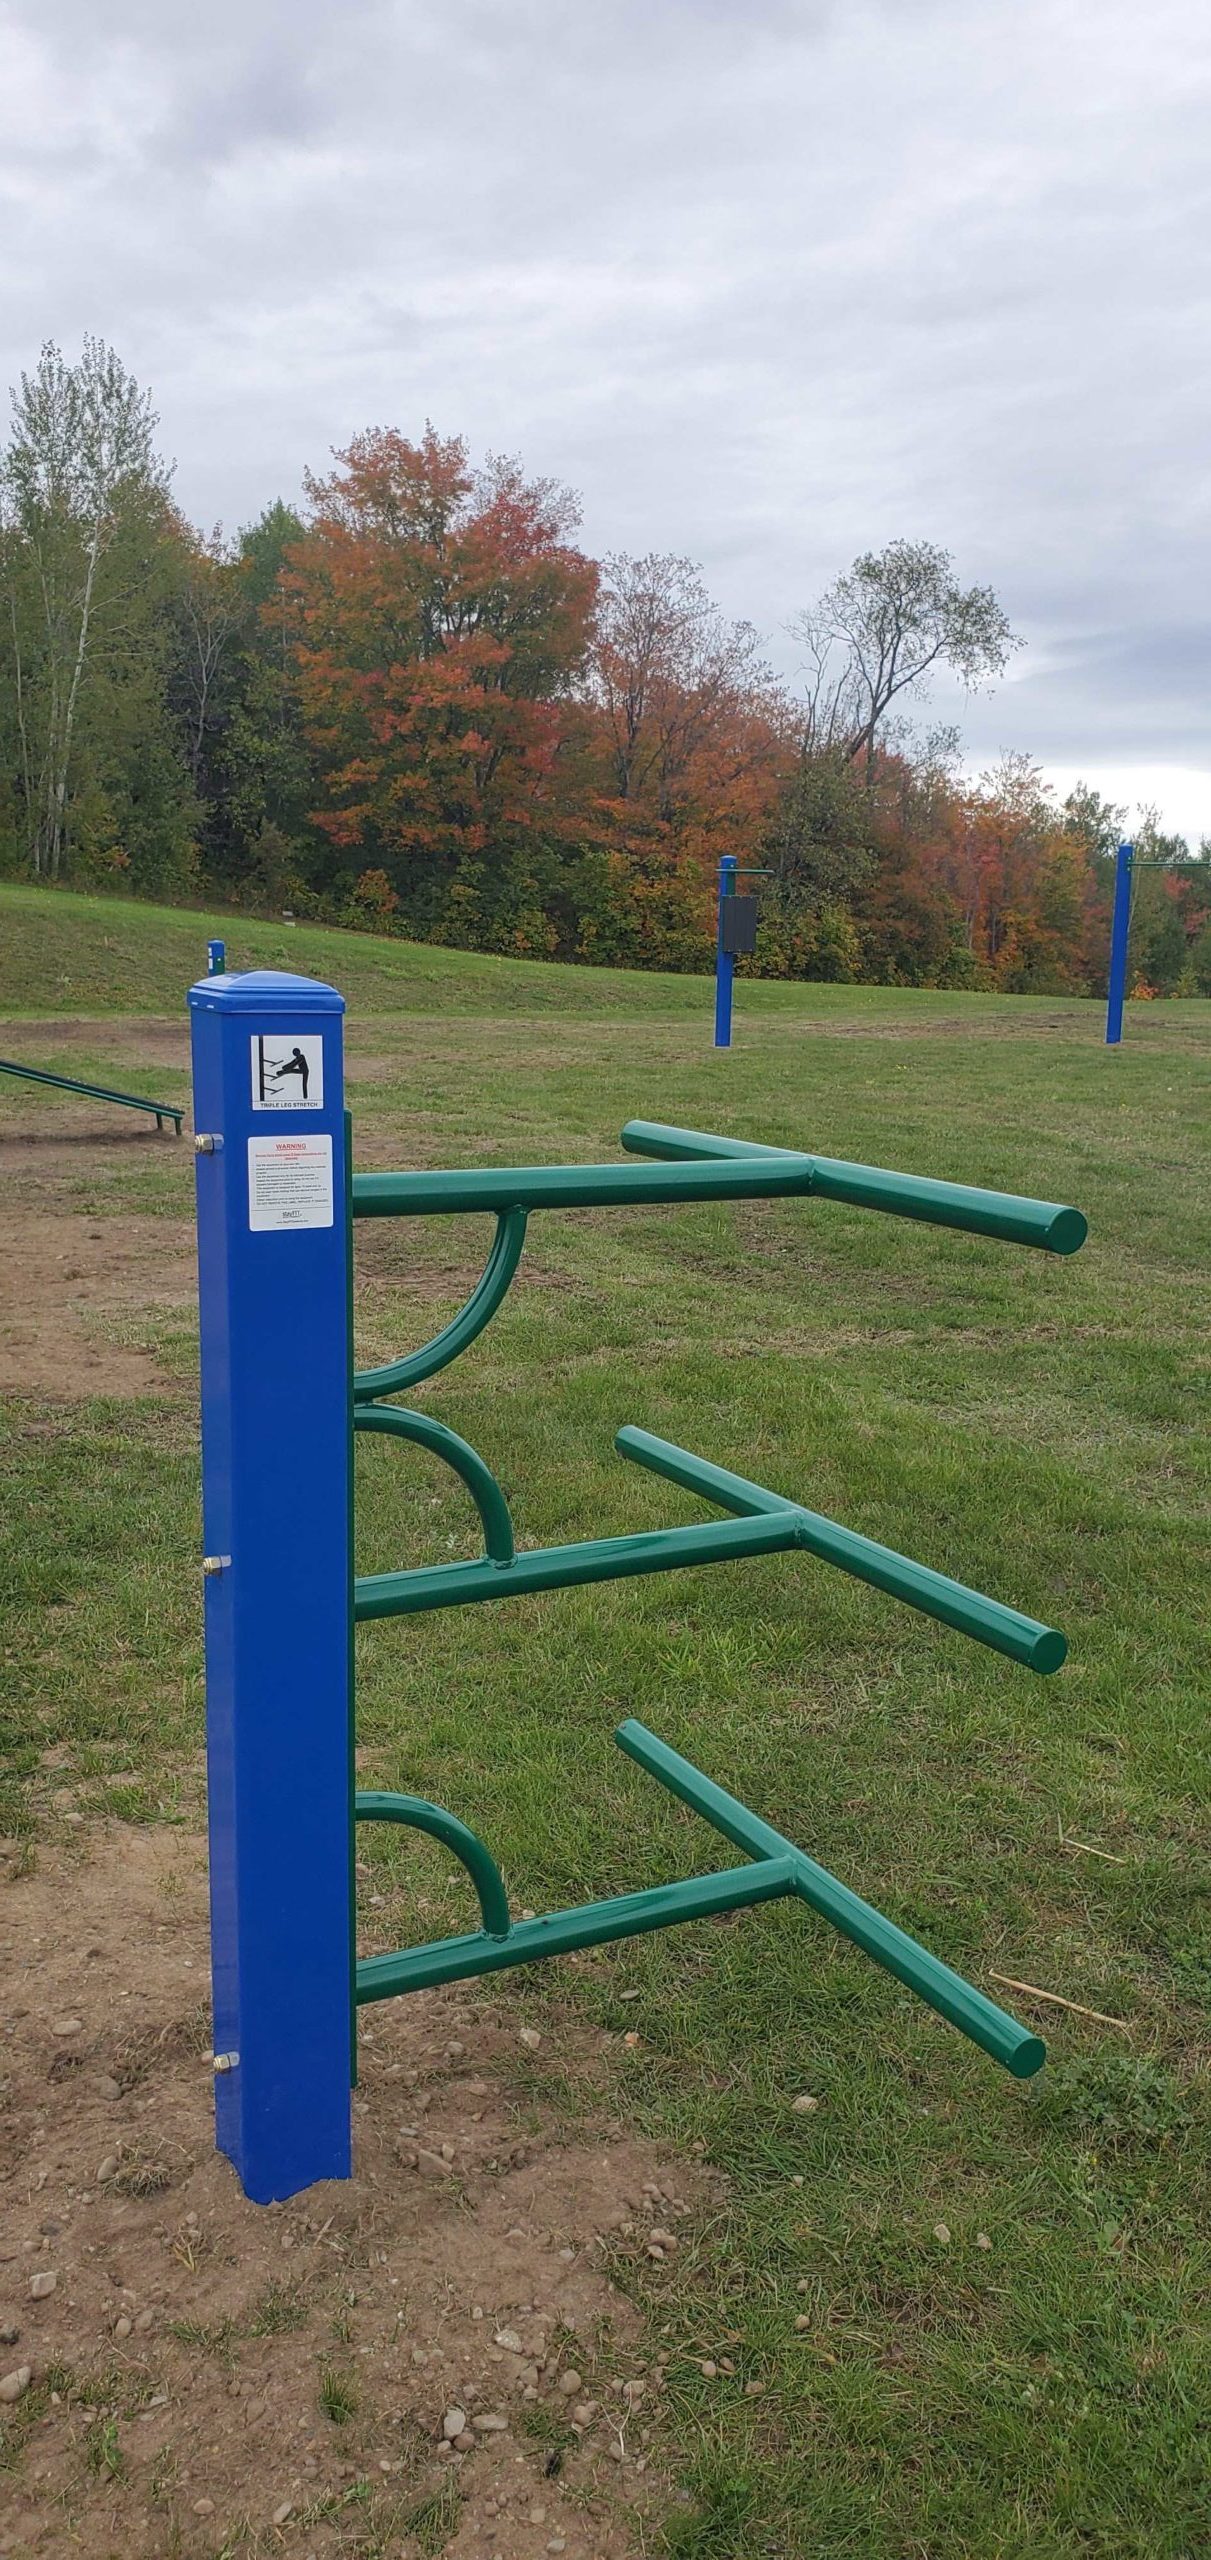 StayFit systems installation at Canadian Armed Forces Base 29